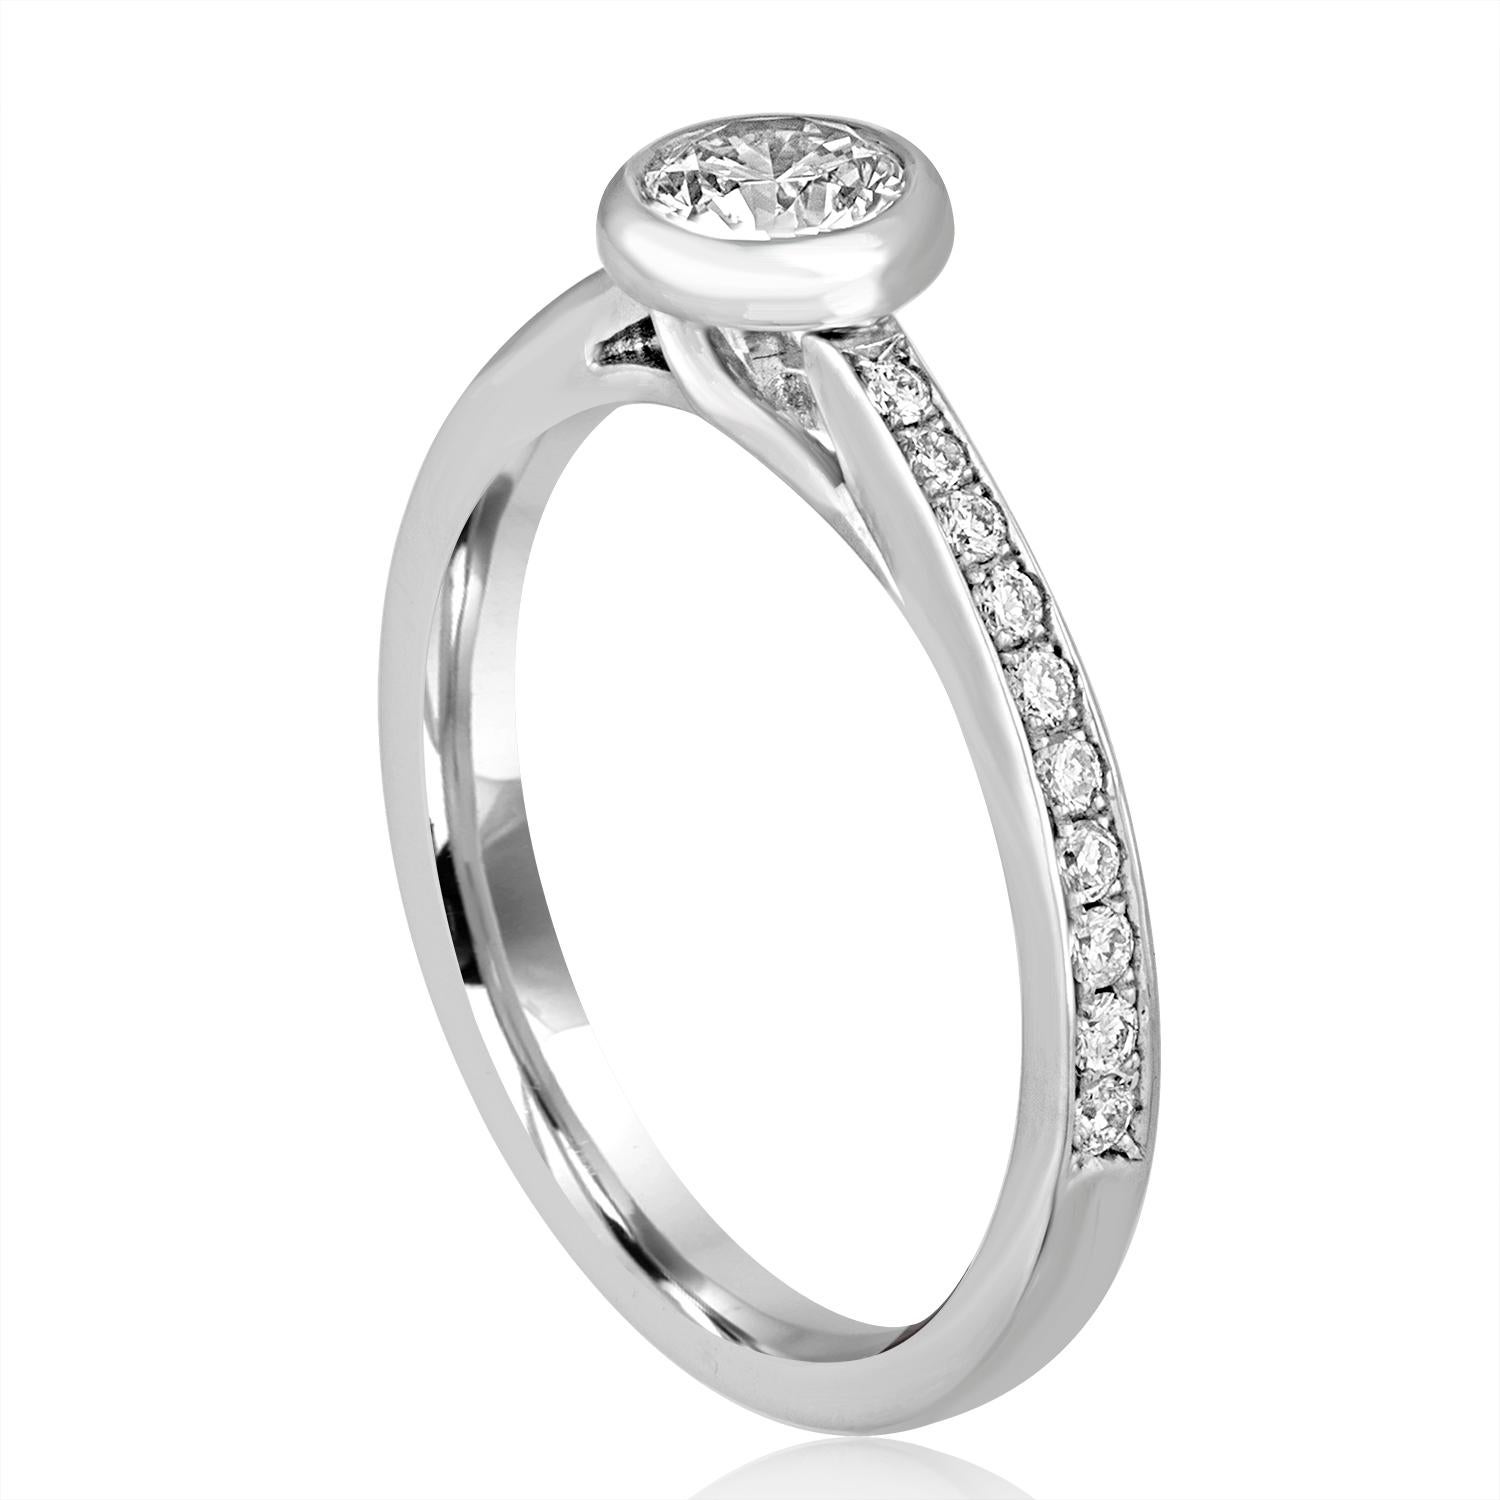 The ring is 18K White Gold
The center stone is 0.53 Carats F SI2
The center stone is set in a gold bezel
The small diamonds on the side 0.27 Carats F SI2
The ring is a size 8, sizable
The ring weighs 3.6 grams